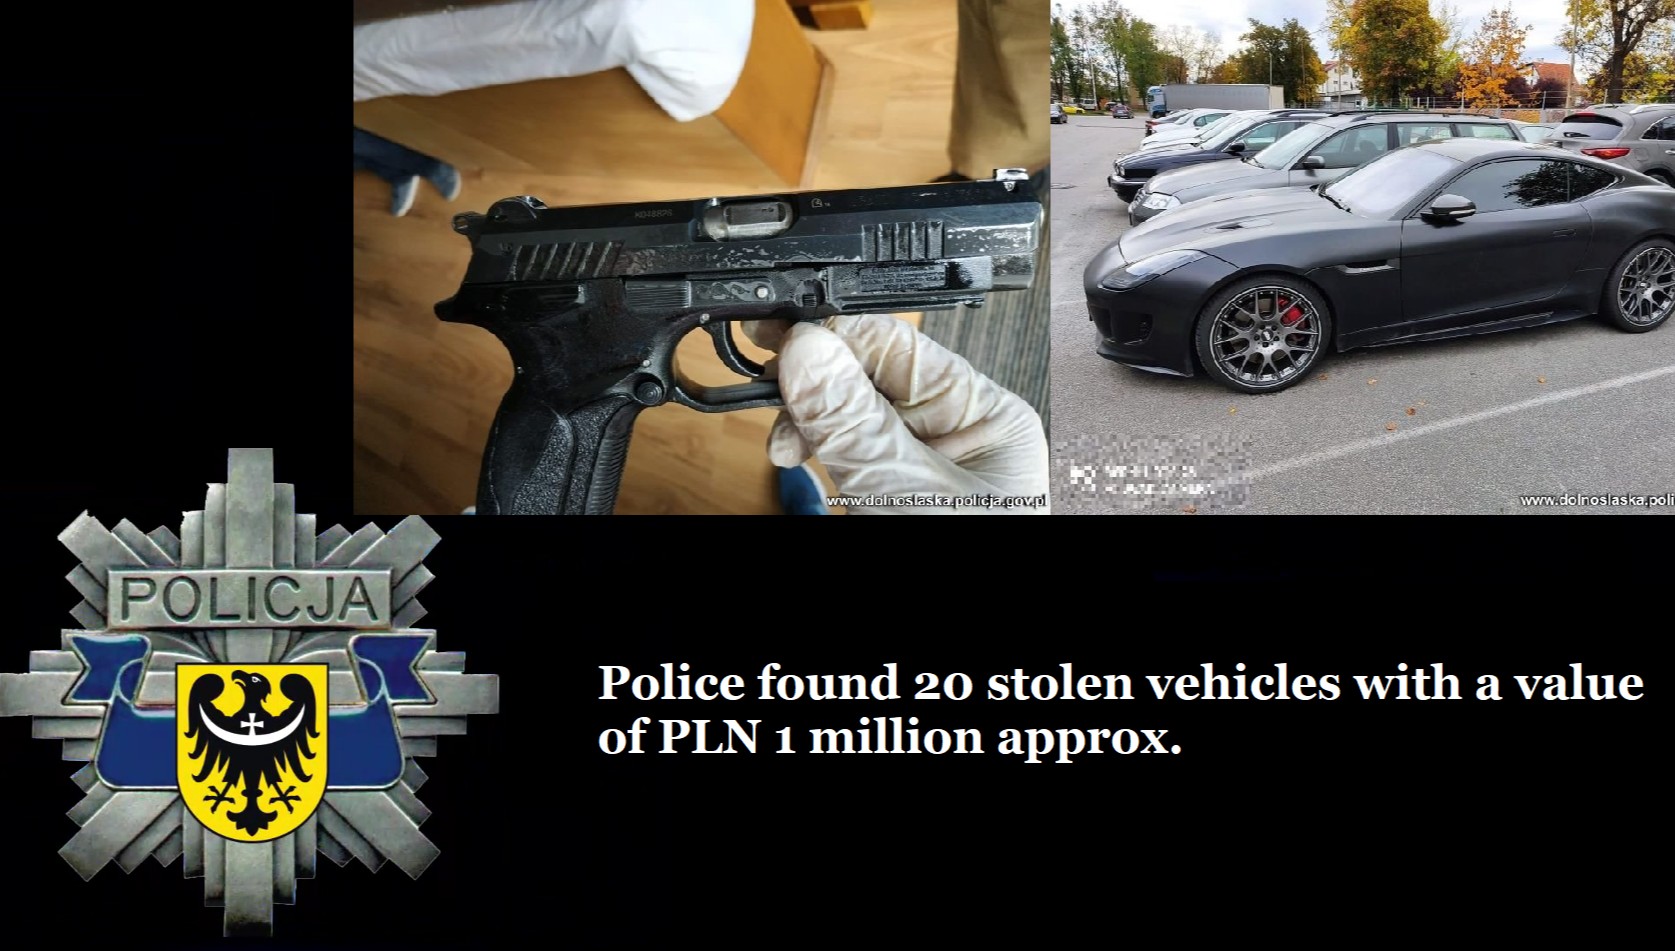 Police found 20 stolen vehicles with a value of PLN 1 million approx. [PHOTOS]